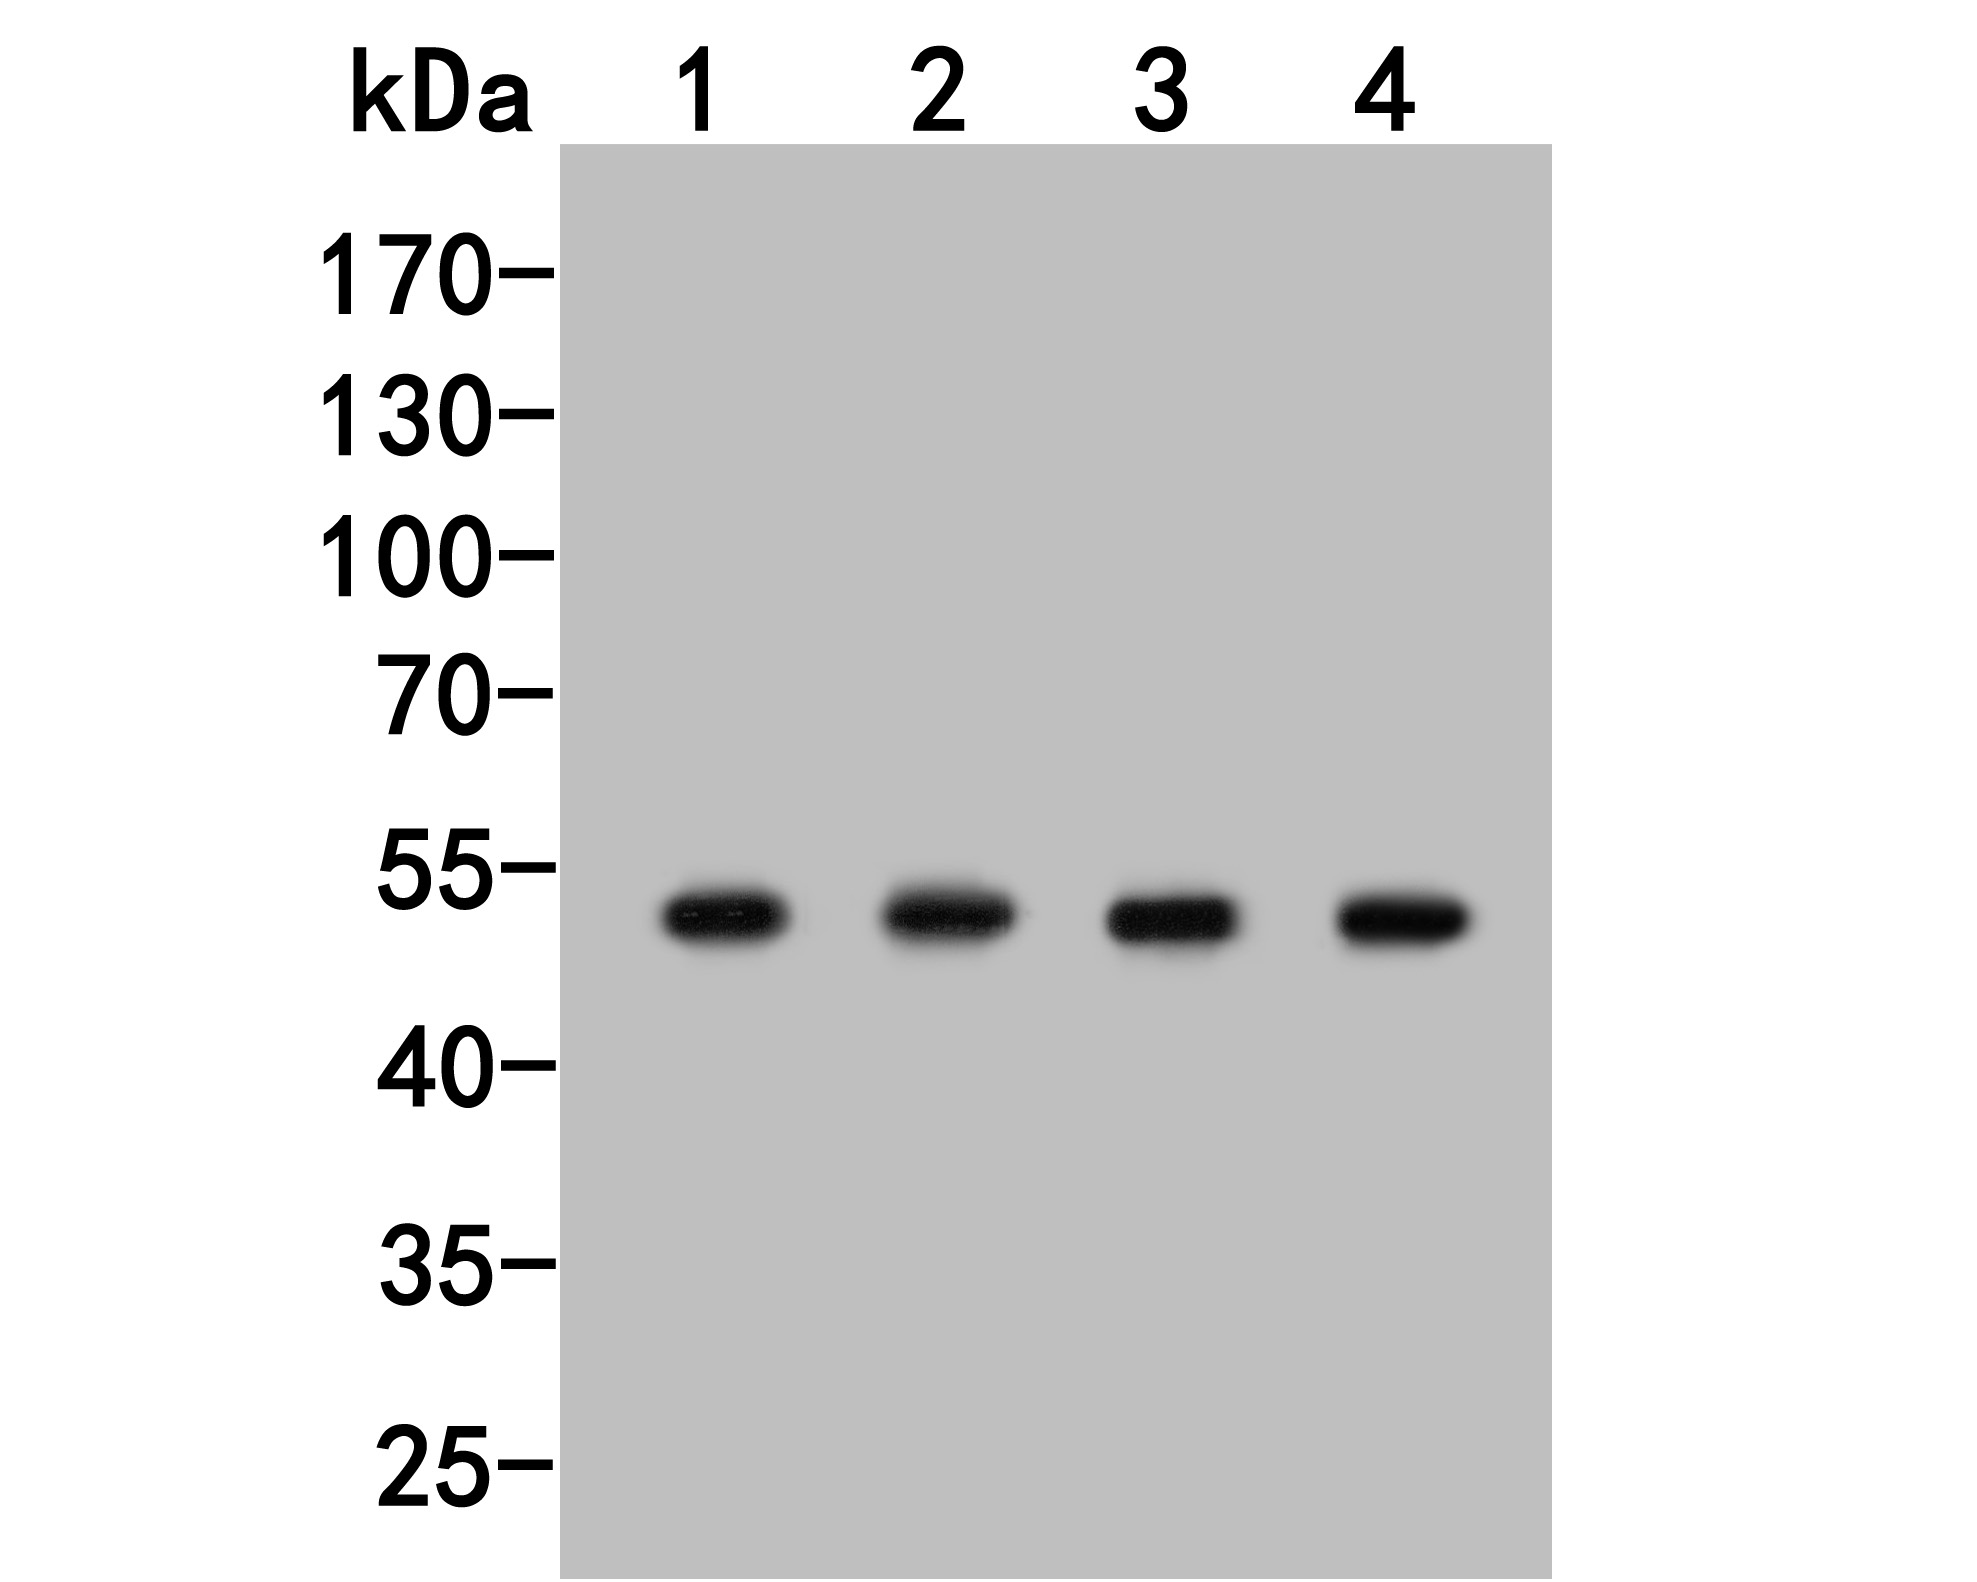 Western blot analysis of TAT on different lysates. Proteins were transferred to a PVDF membrane and blocked with 5% BSA in PBS for 1 hour at room temperature. The primary antibody (HA500016, 1/1,000) was used in 5% BSA at room temperature for 2 hours. Goat Anti-Rabbit IgG - HRP Secondary Antibody (HA1001) at 1:5,000 dilution was used for 1 hour at room temperature.<br />
Positive control: <br />
Lane 1: HL-60 cell lysate<br />
Lane 2: Daudi cell lysate<br />
Lane 3: Mouse kidney tissue lysate<br />
Lane 4: Rat kidney tissue lysate